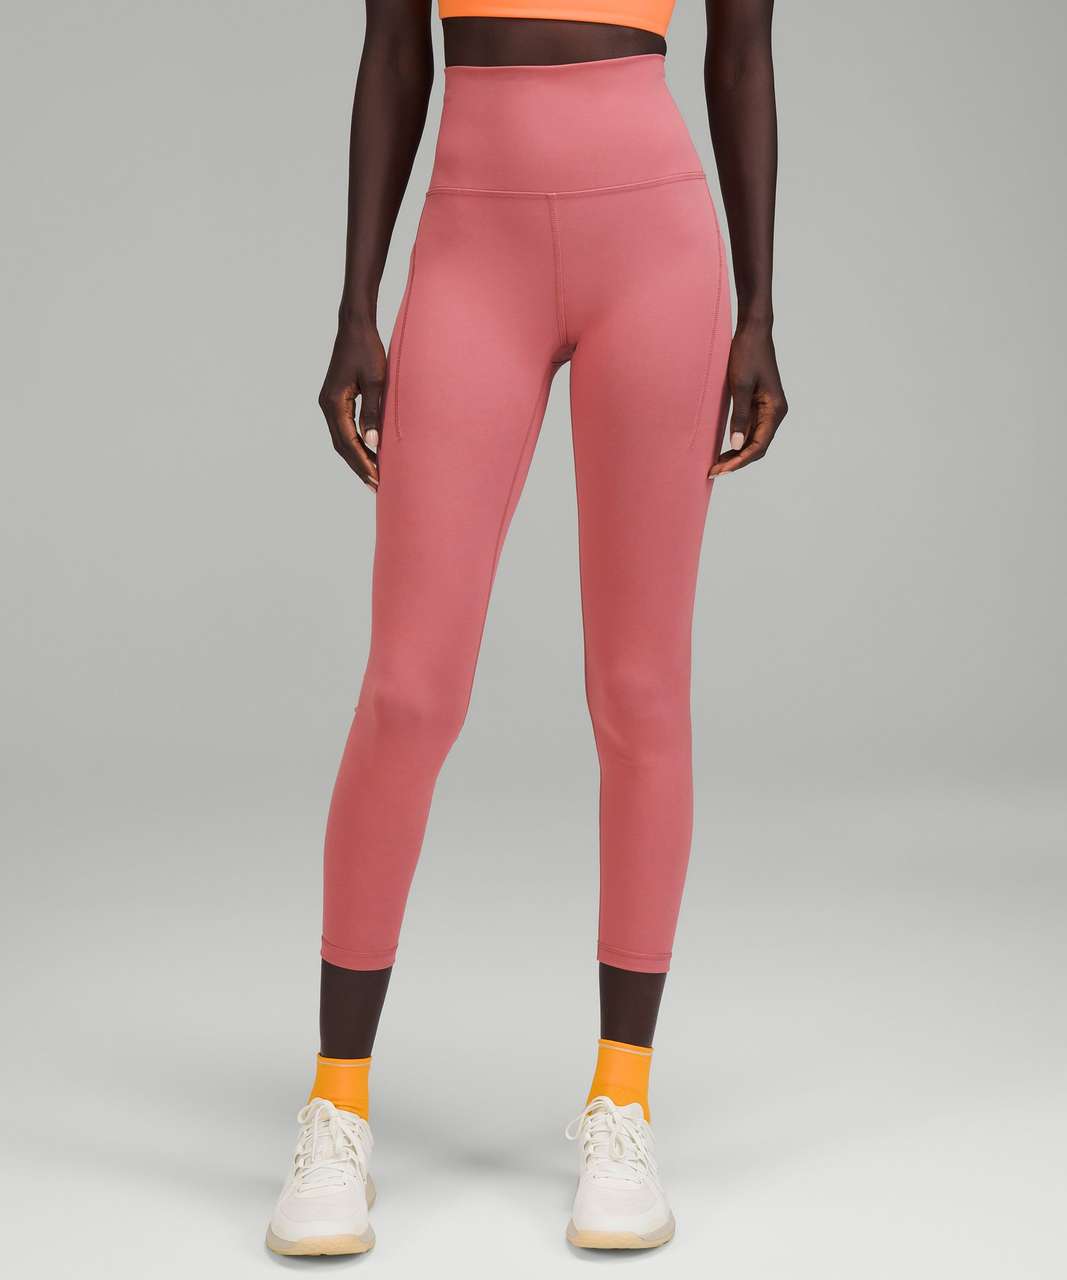 Lululemon Wunder Train High-Rise Tight with Pockets 25" - Brier Rose